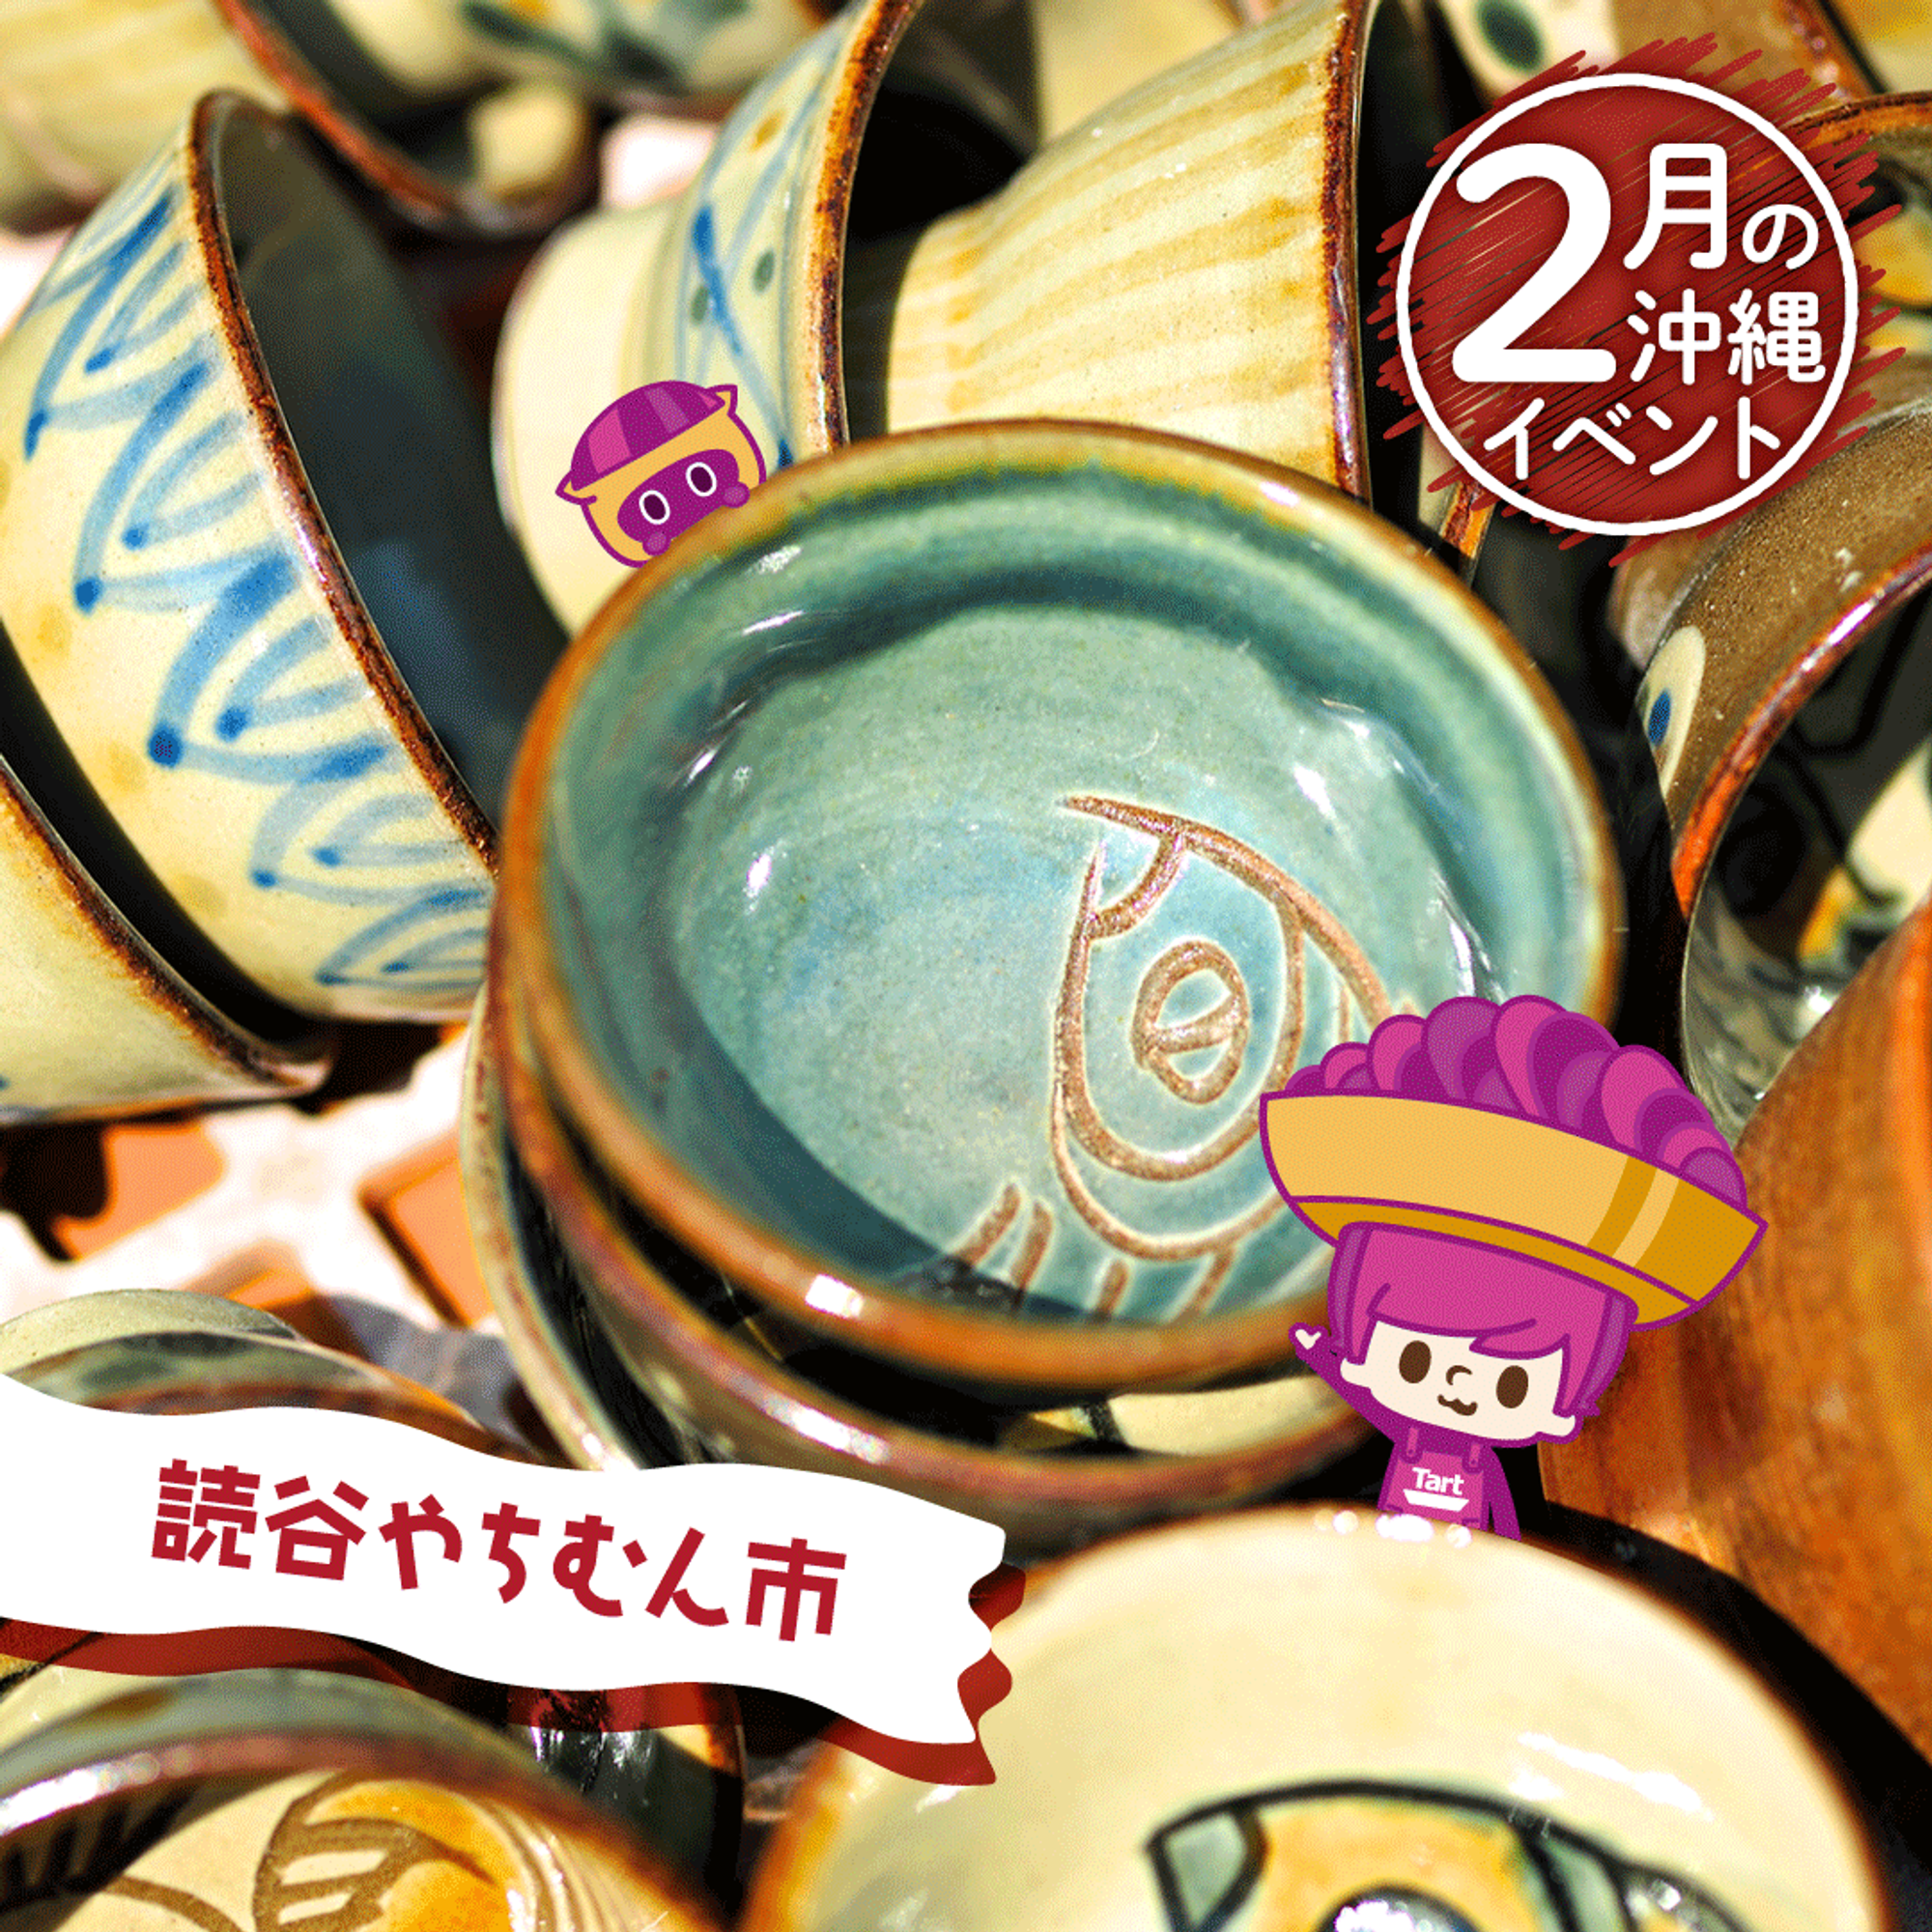 February 2th and 24th is “Yomitan Yachimun Market”